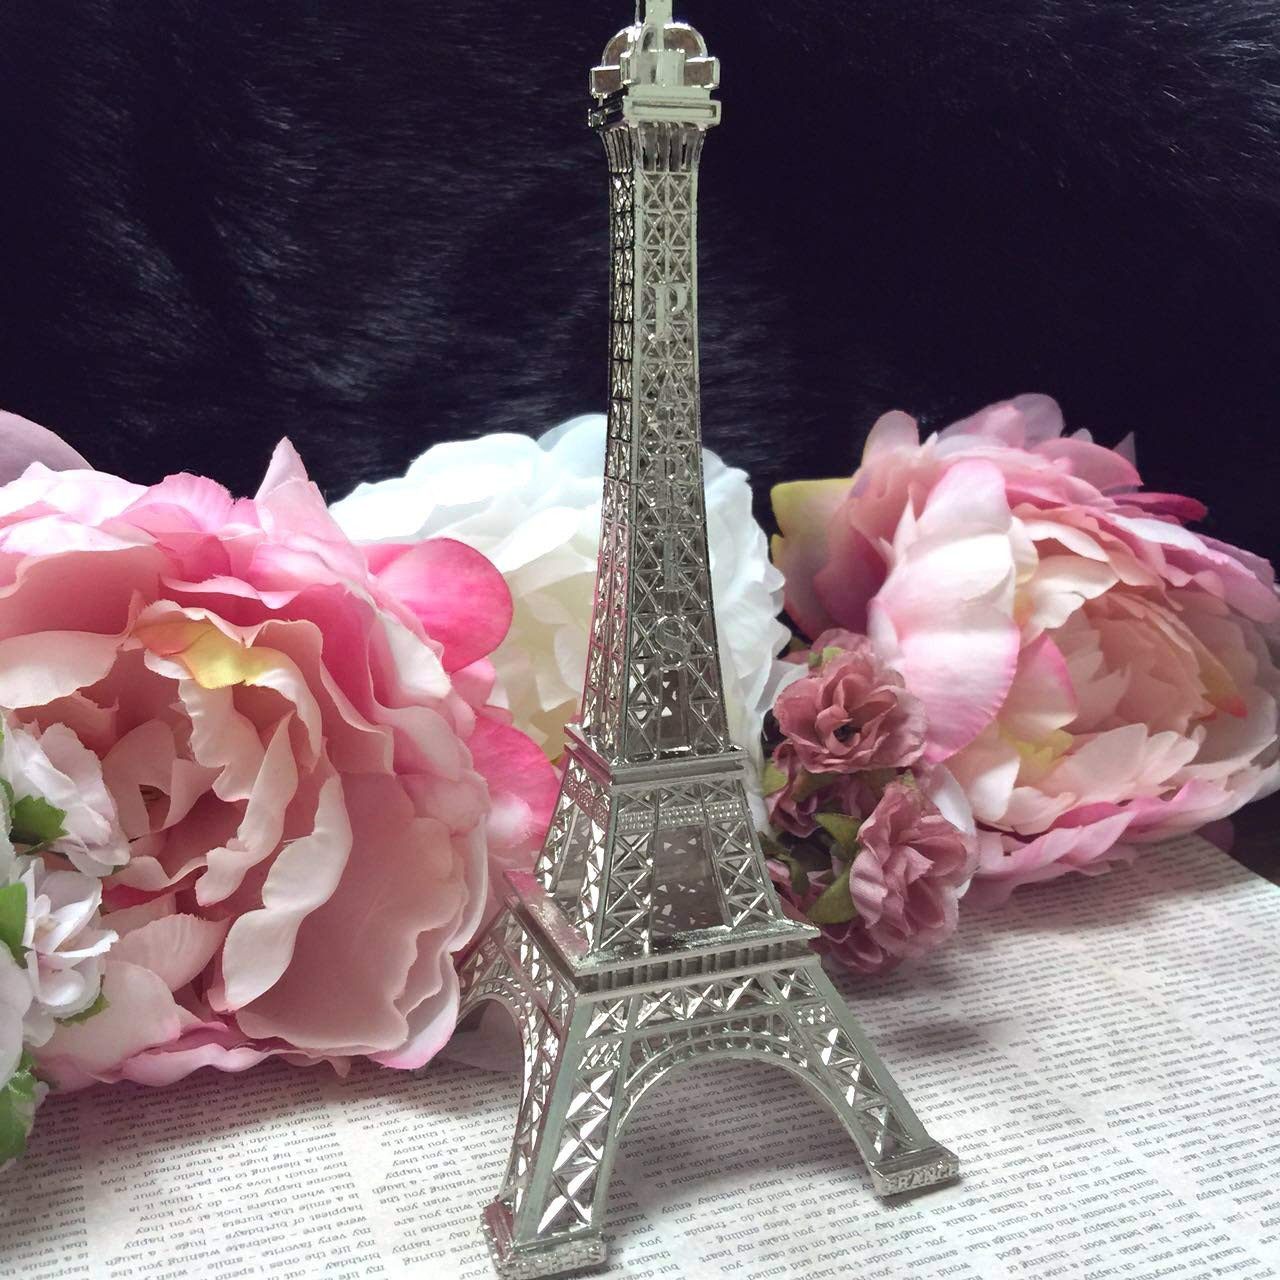 15 Lovable 20 Inch Eiffel tower Vases 2024 free download 20 inch eiffel tower vases of amazon com 7 inch 18cm silver metal eiffel tower statue figurine with regard to amazon com 7 inch 18cm silver metal eiffel tower statue figurine replica centerp